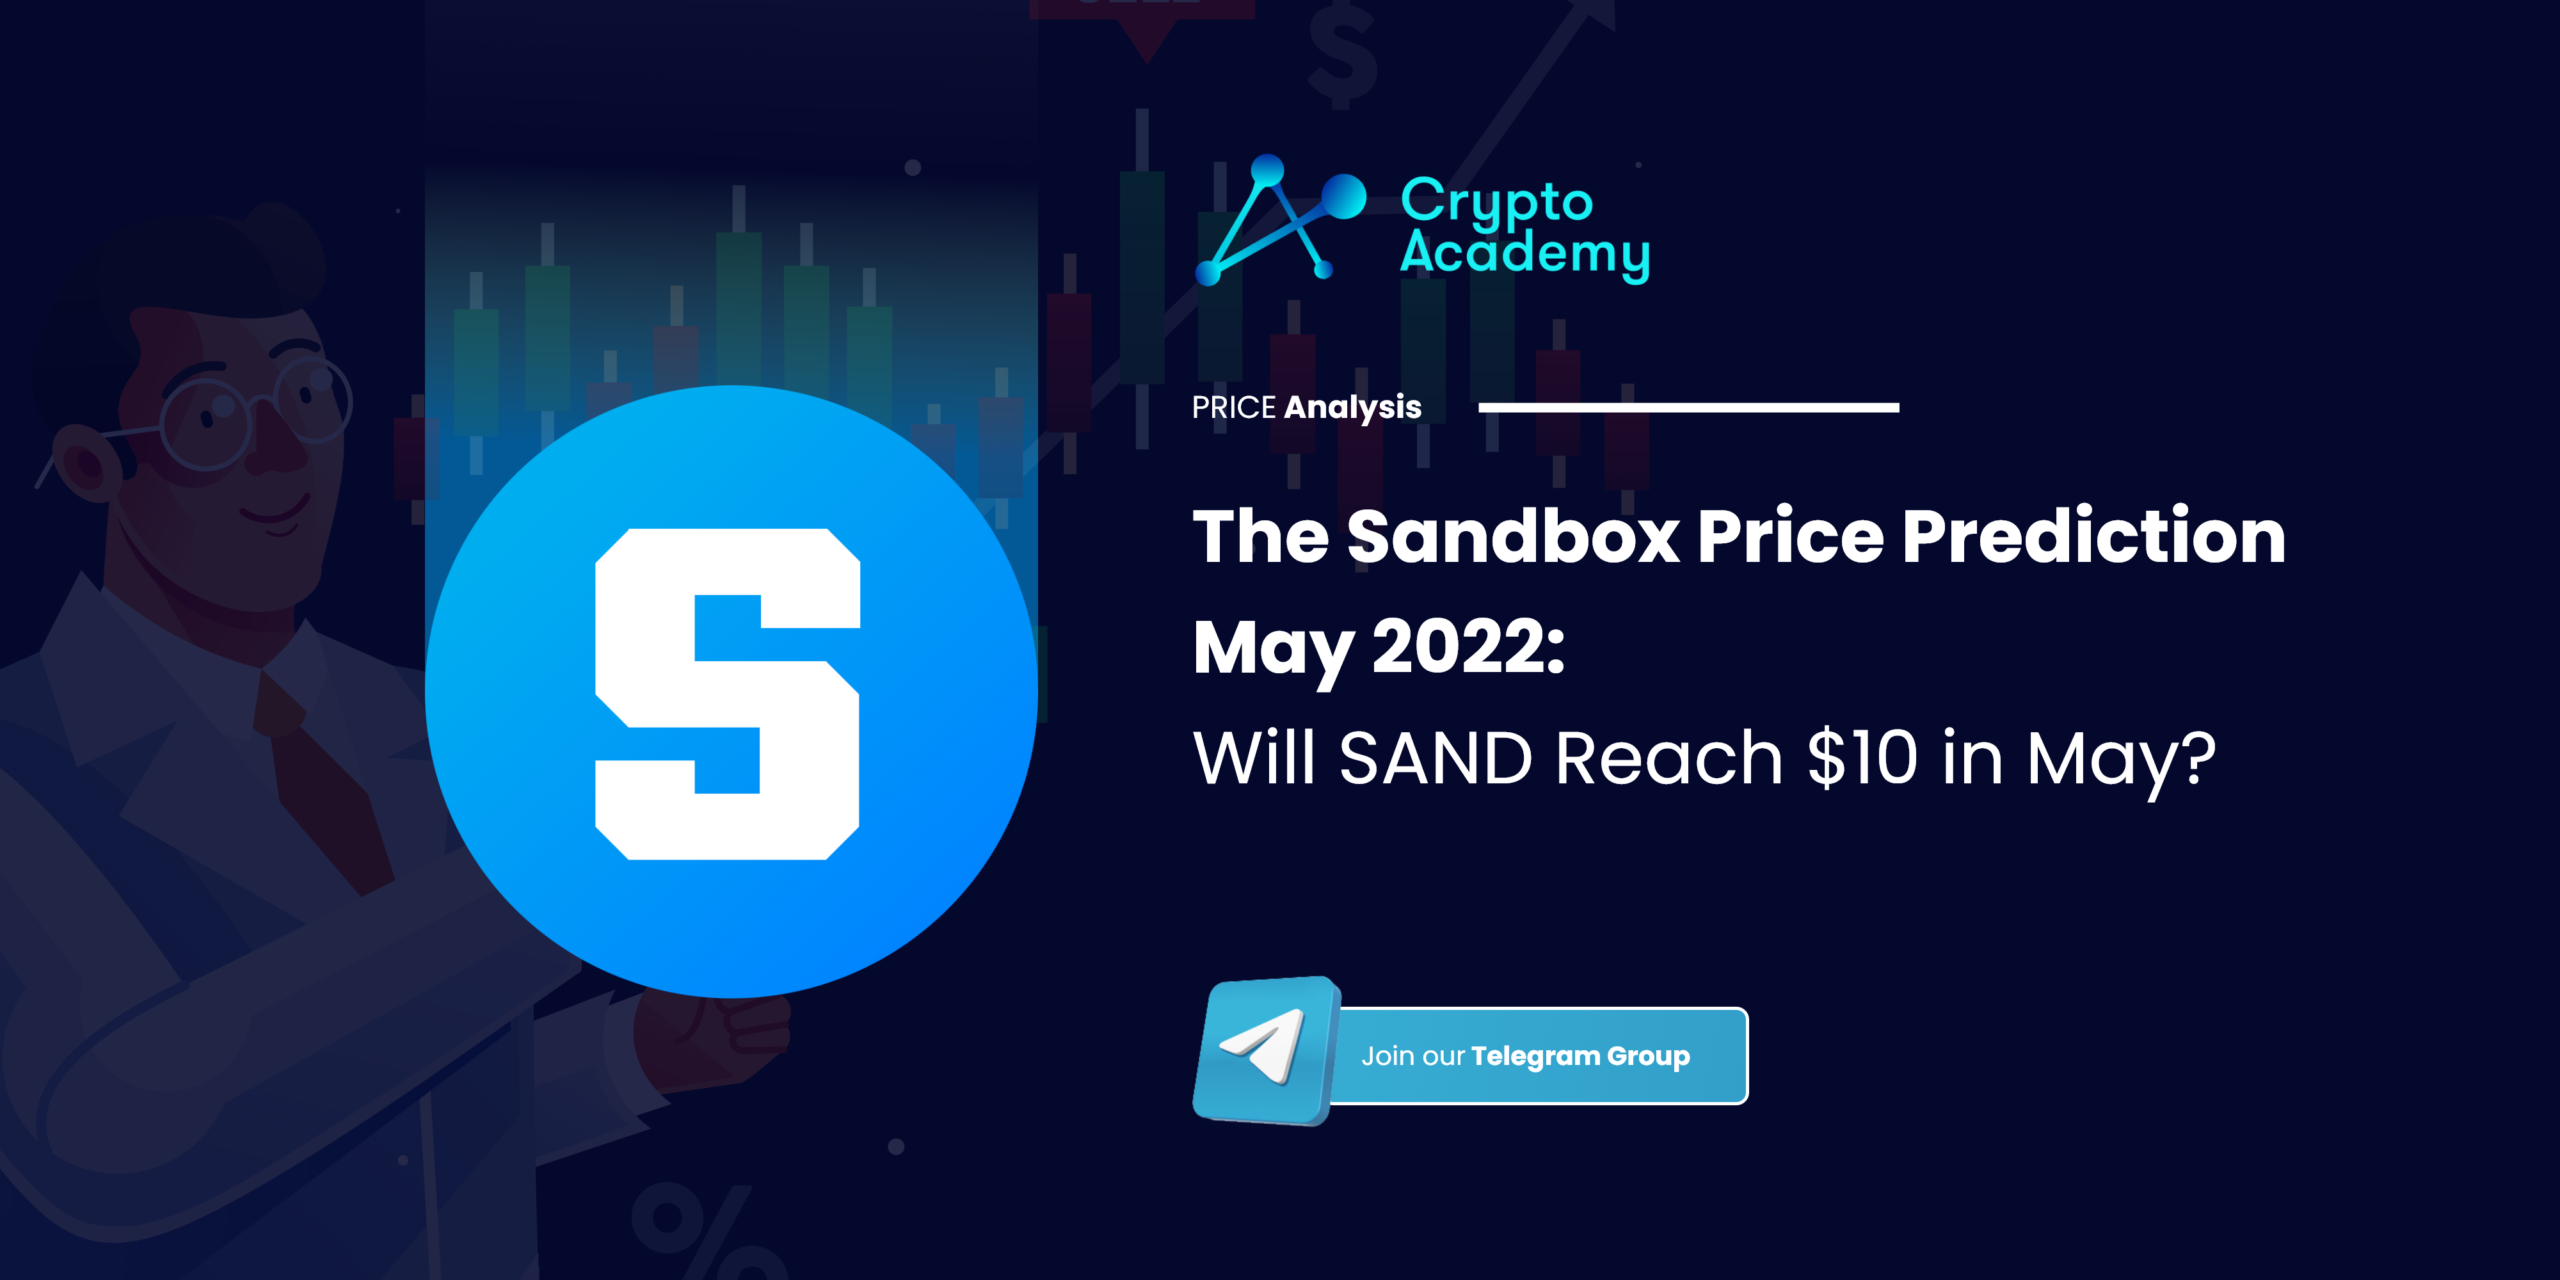 The Sandbox Price Prediction May 2022: Will SAND Reach $10 in May?